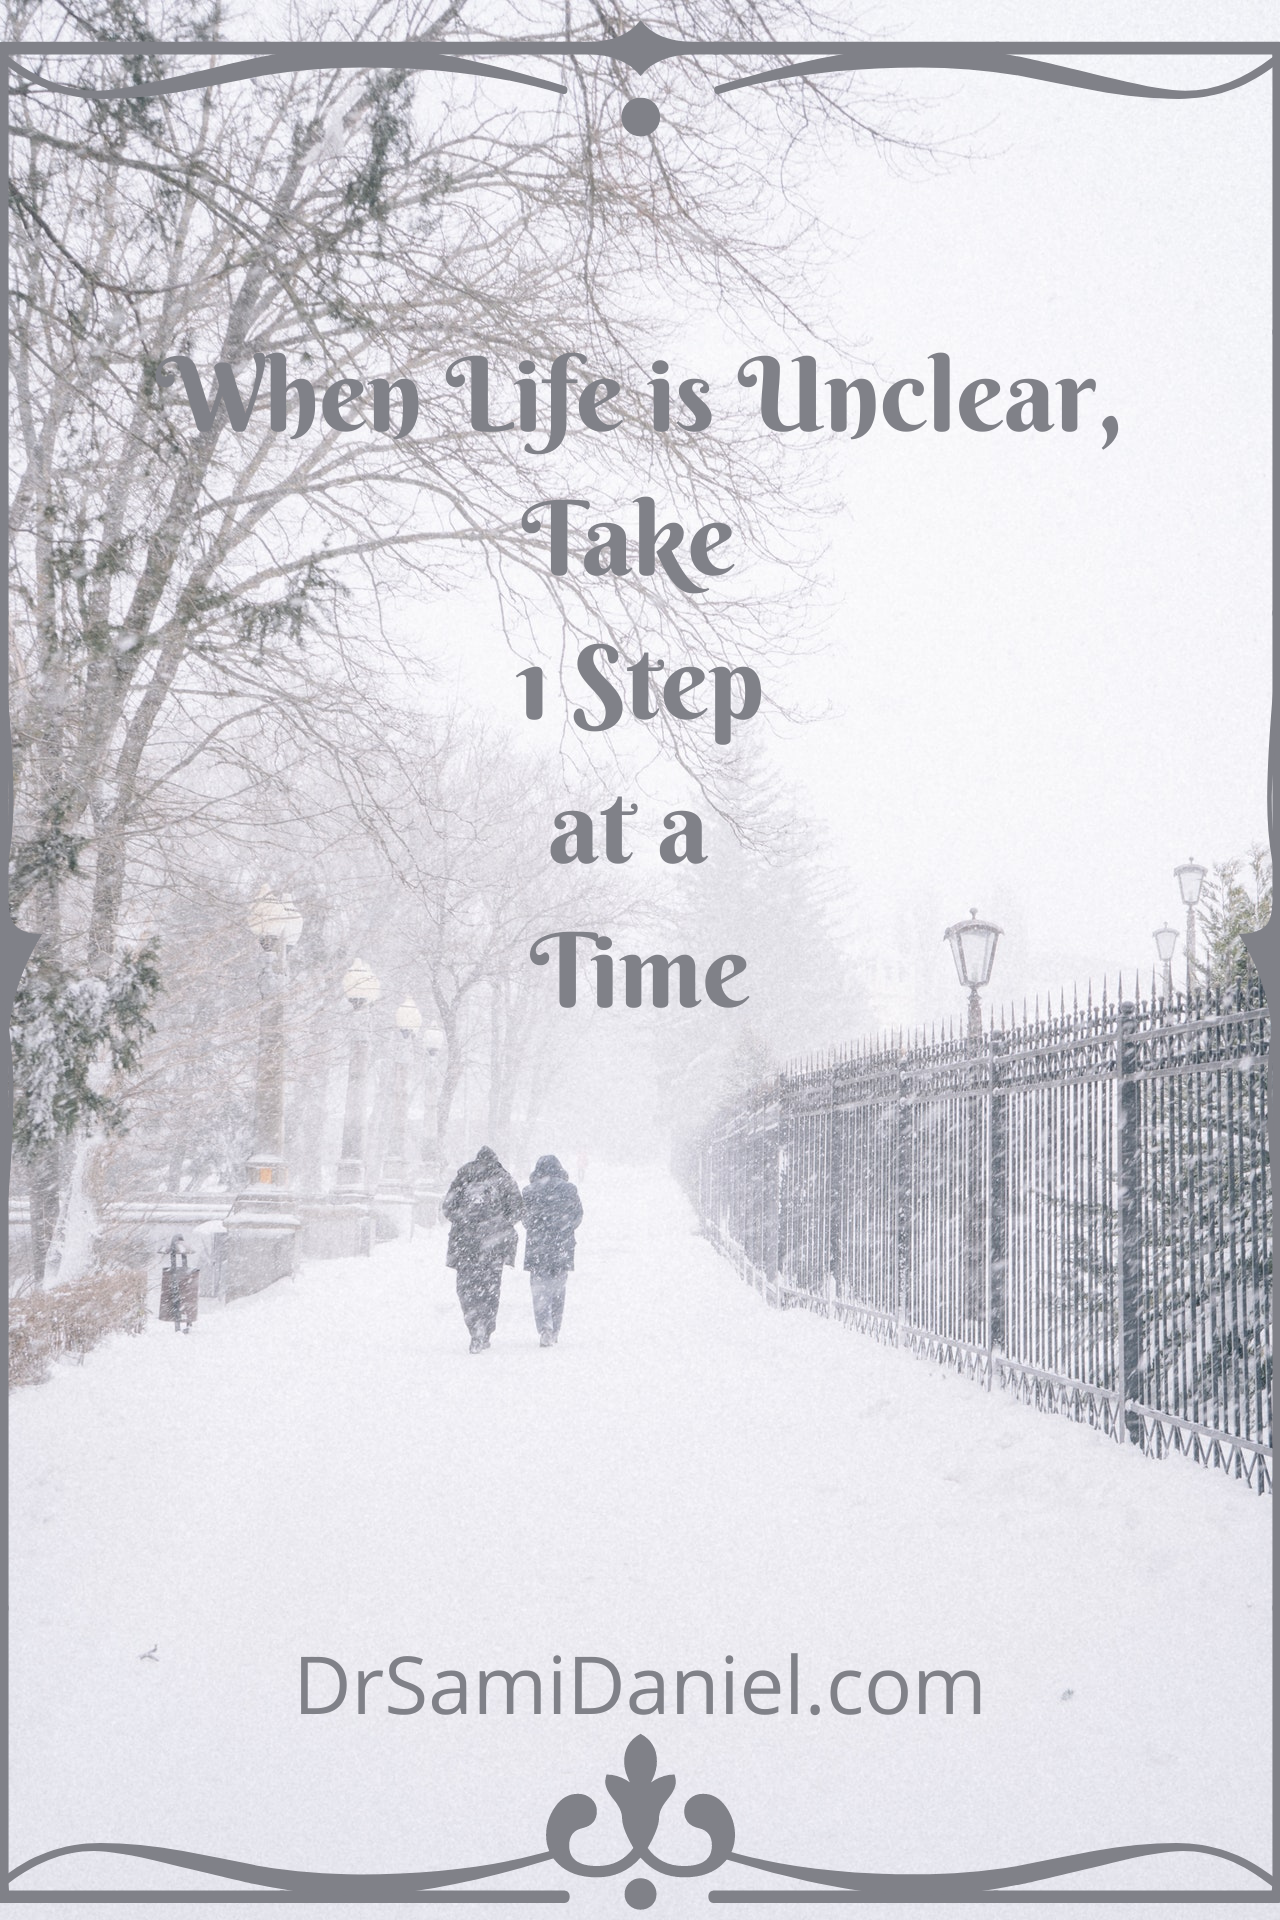 When Life is Unclear, Take 1 Step at a Time